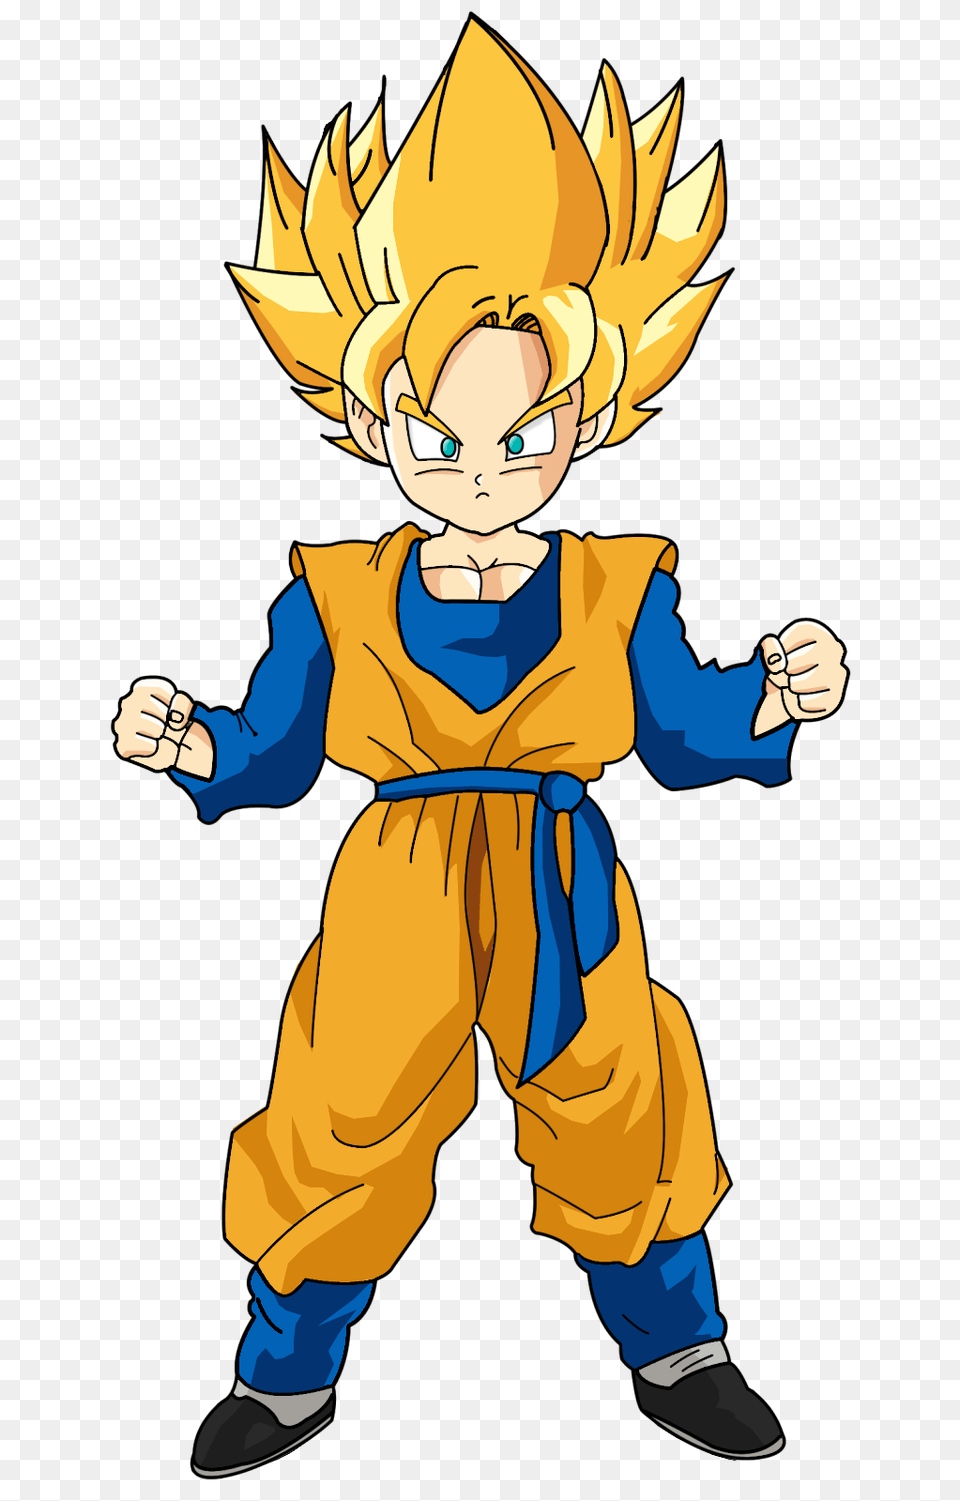 Goten Ssj And I Like How They Resembled Gohan Dragon Ball Z, Book, Comics, Publication, Baby Png